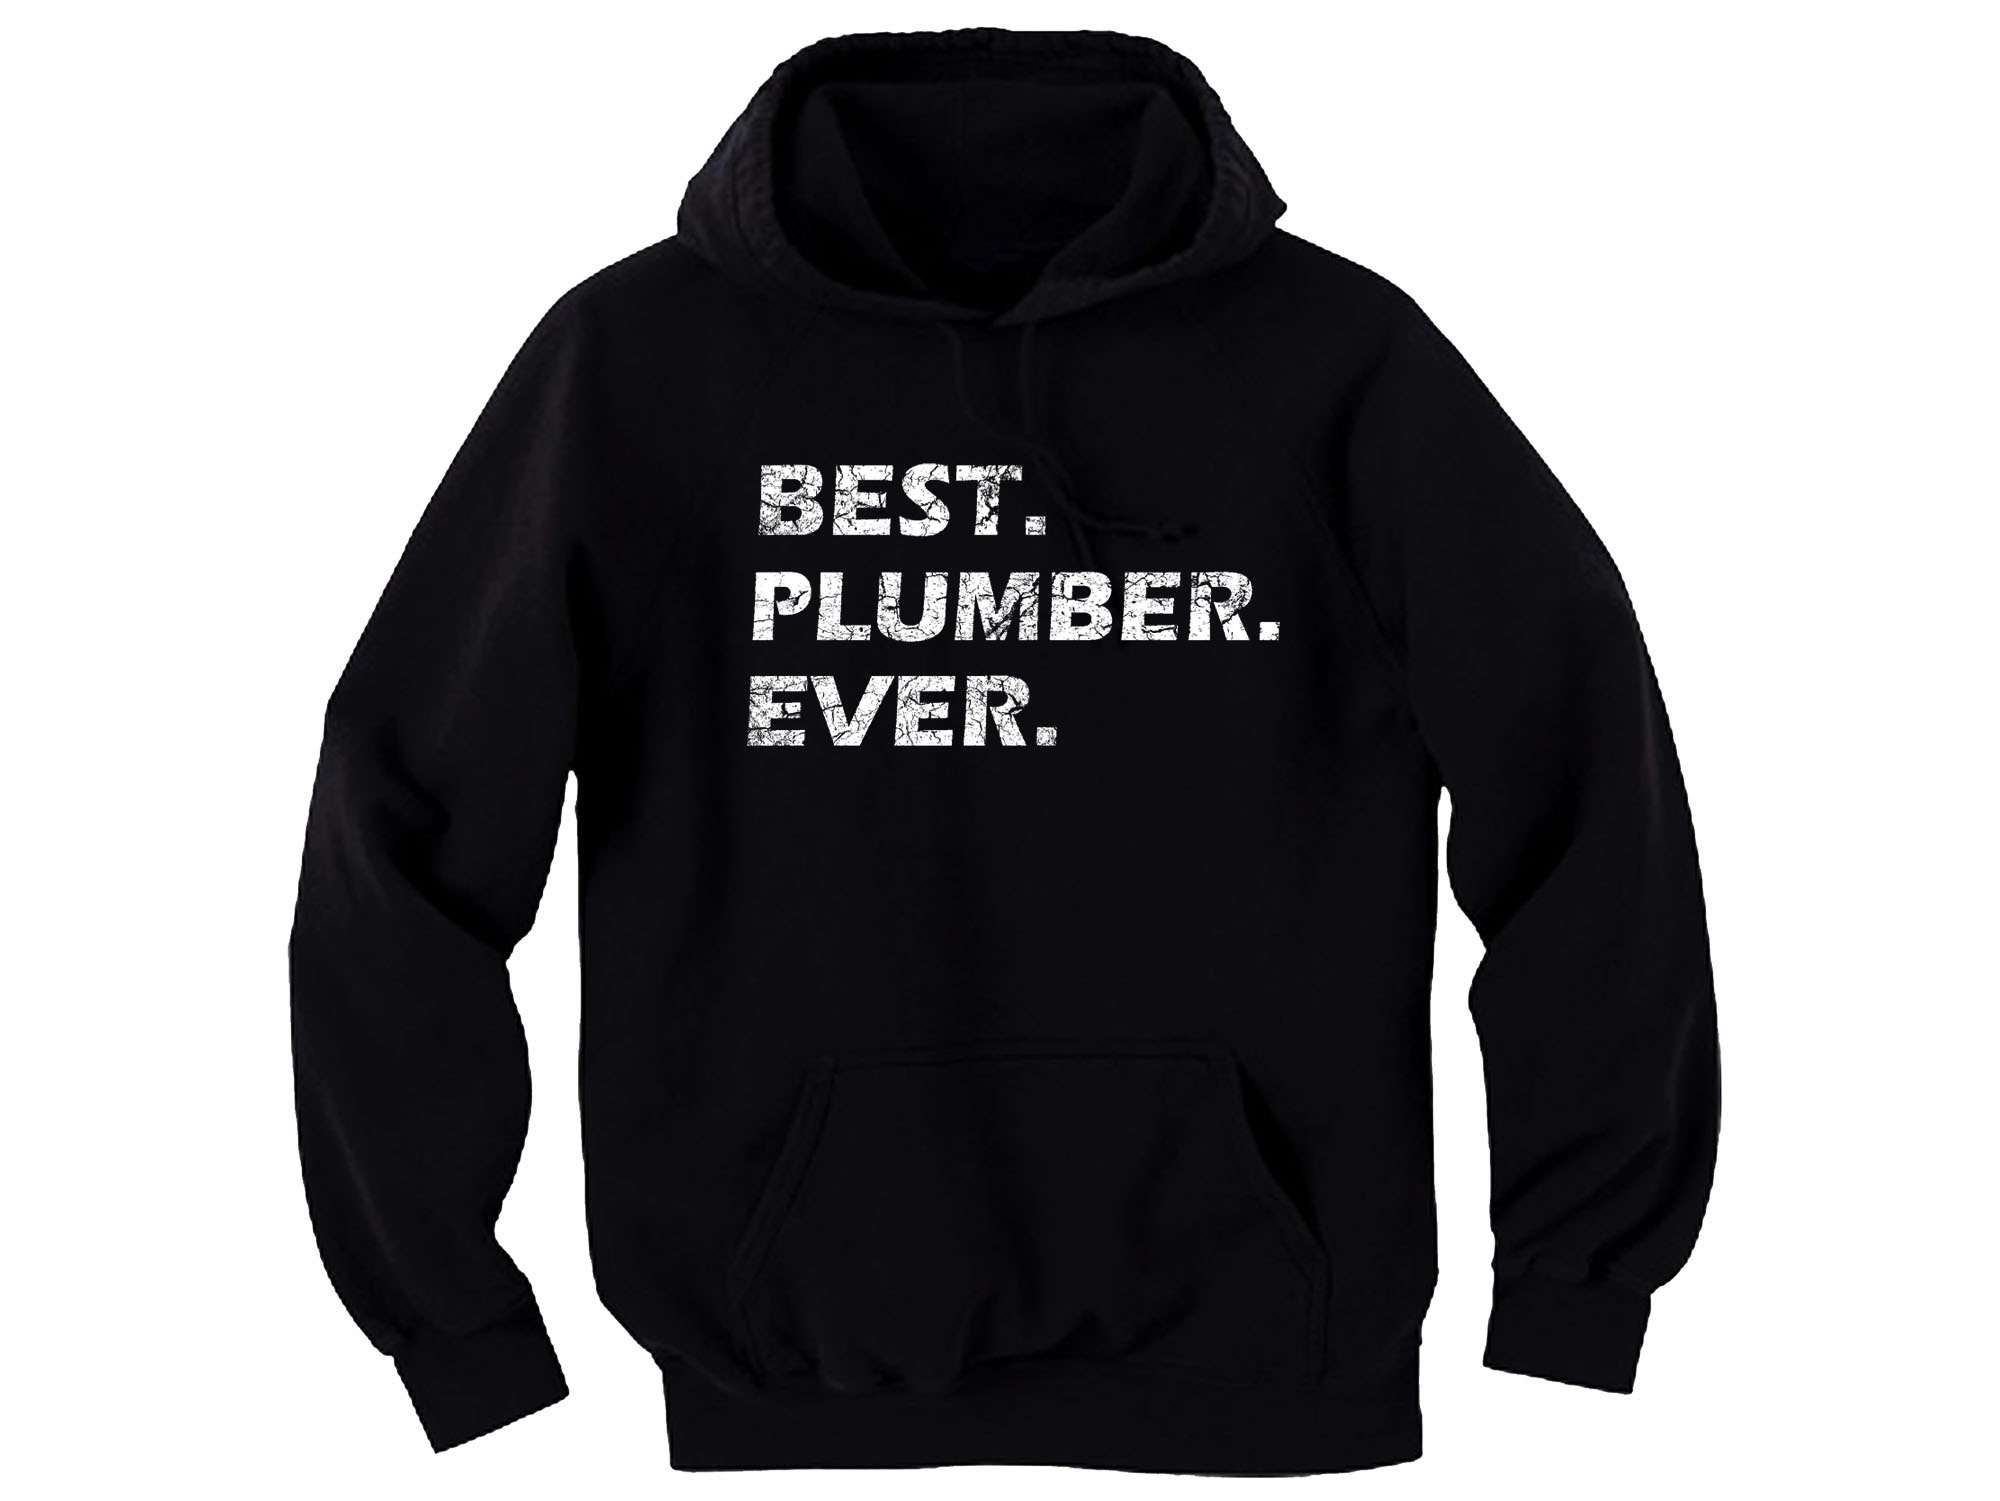 Best plumber ever distressed print hoodie coworker,father,friend gift